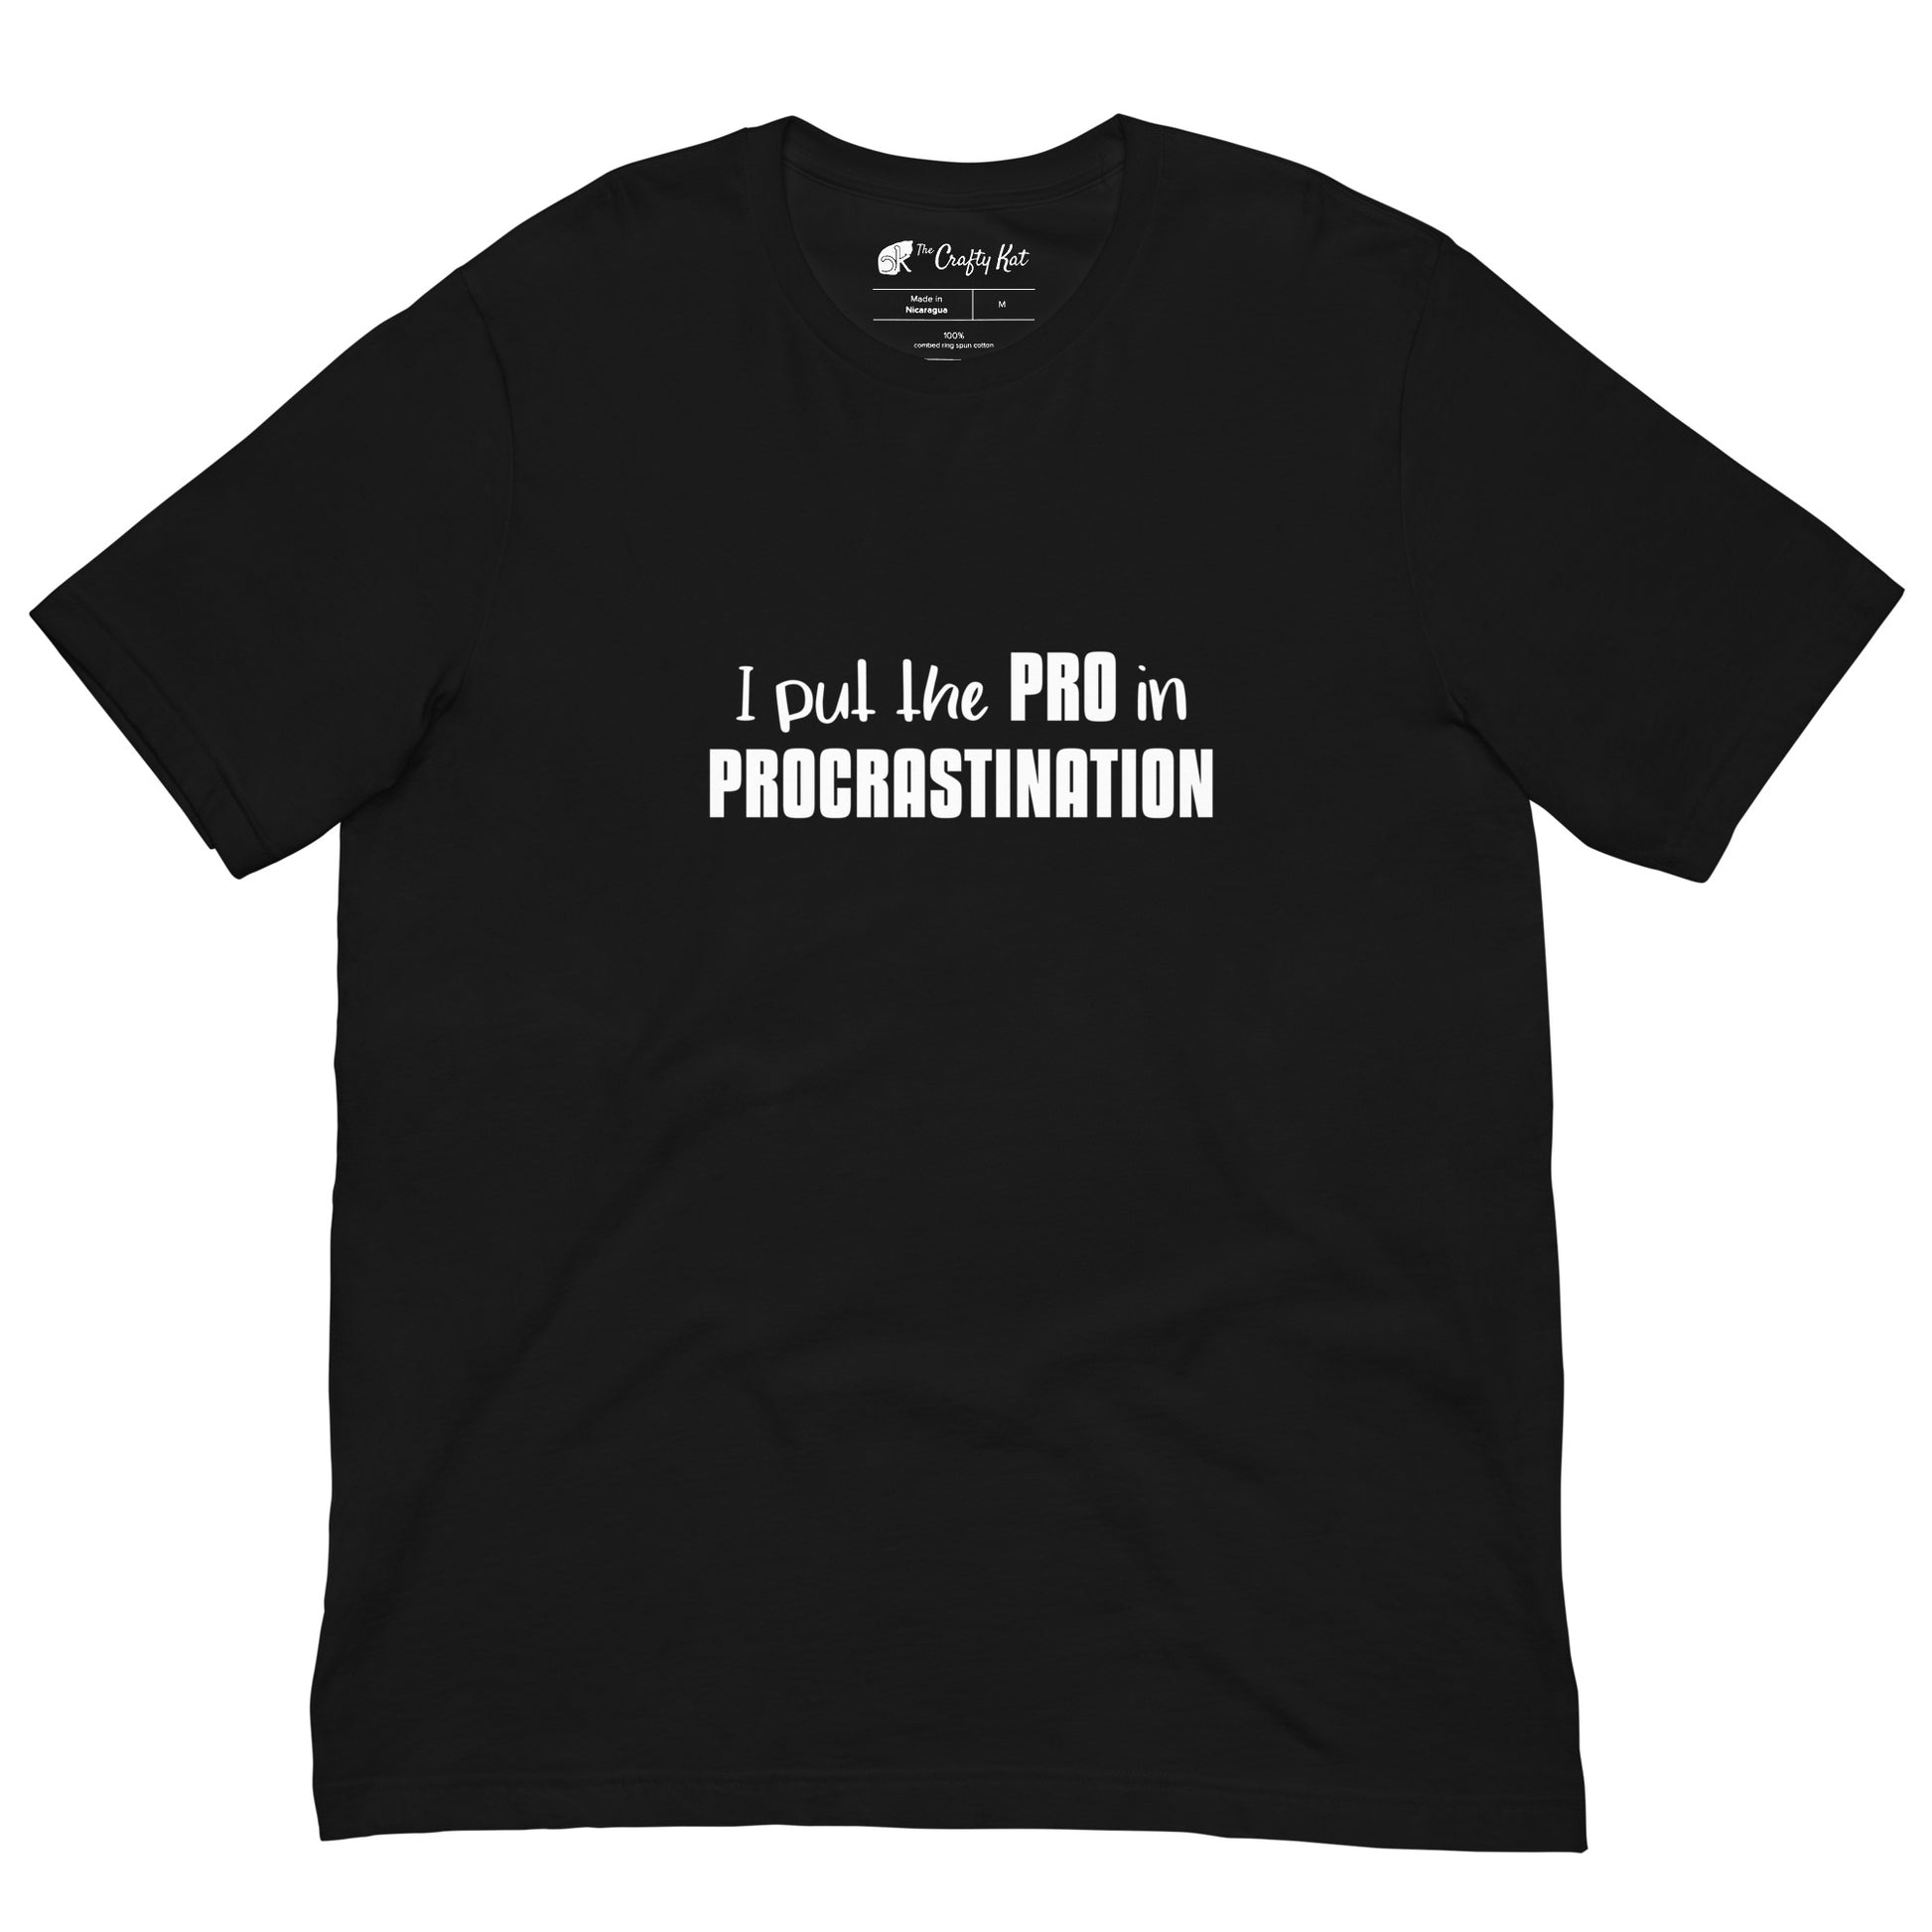 Black unisex t-shirt with text graphic: "I put the PRO in PROCRASTINATION"